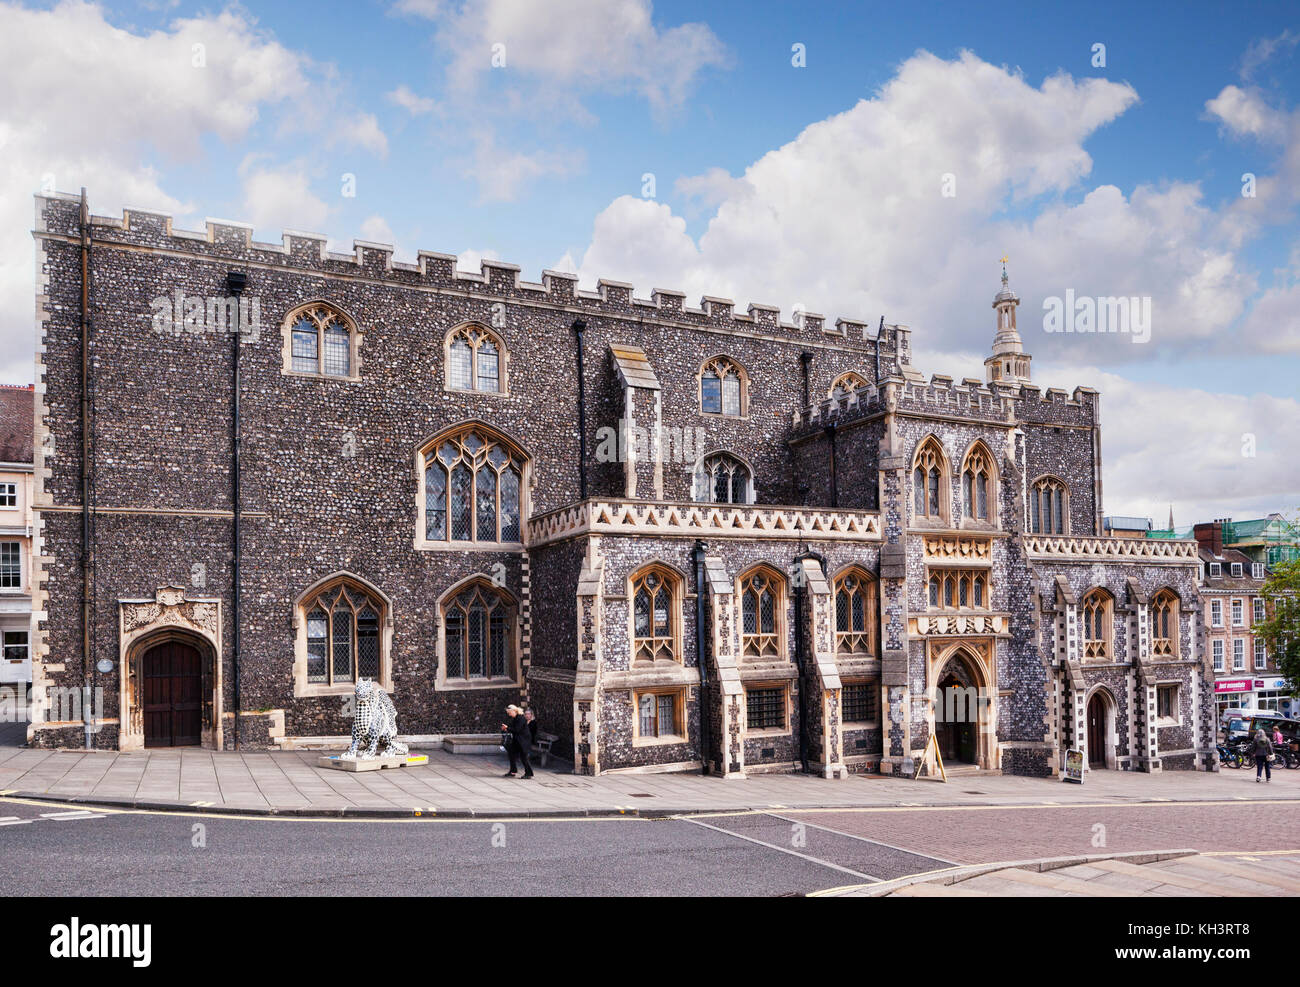 The Guildhall, one of the 12 Heritage Buildings of Norwich, Norfolk, England. Stock Photo